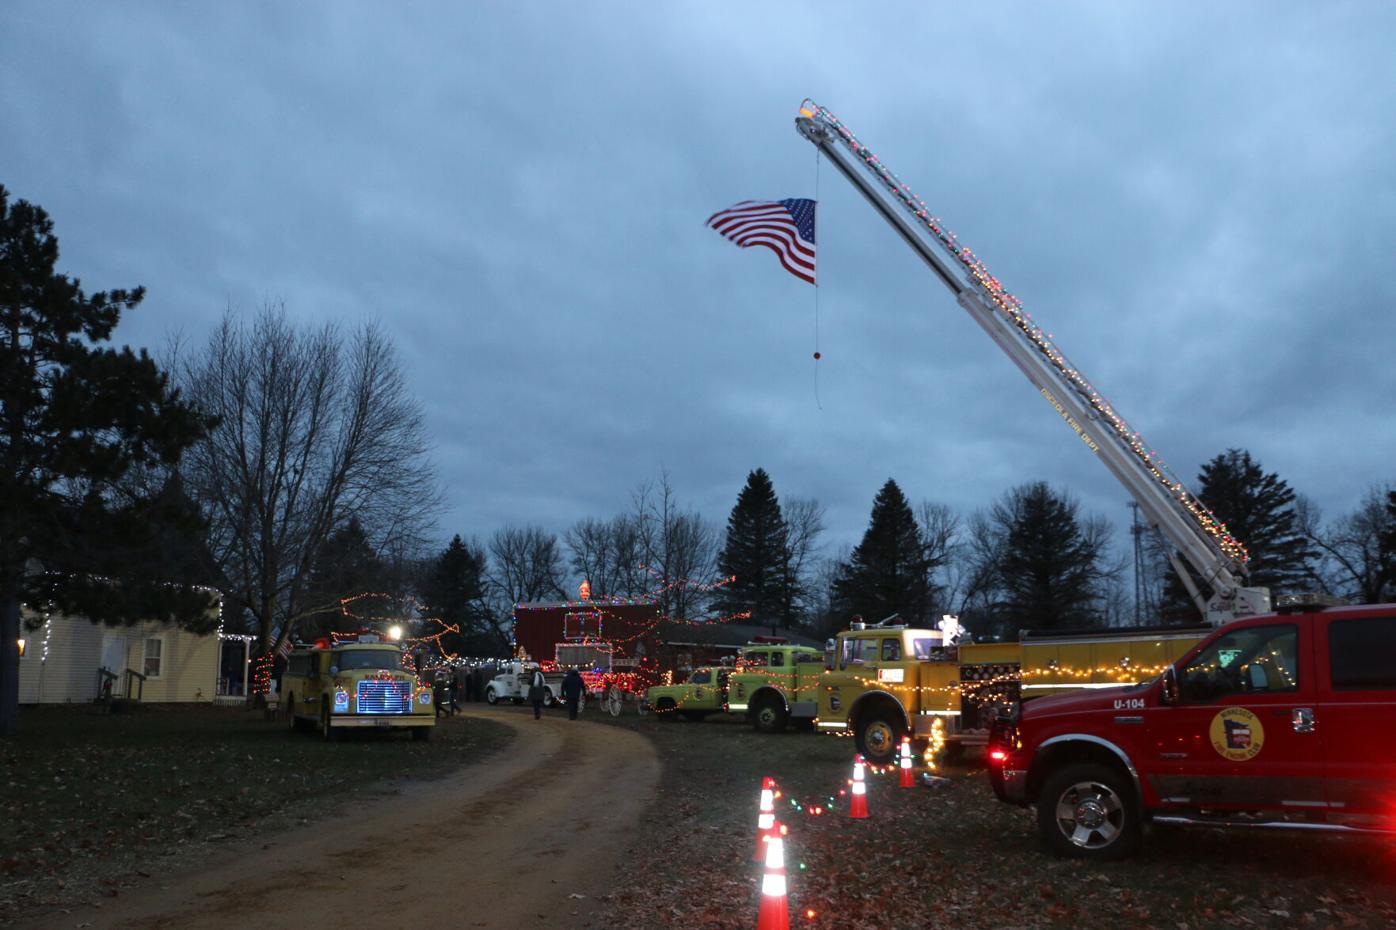 Fire trucks lit up at Christmas in the Village